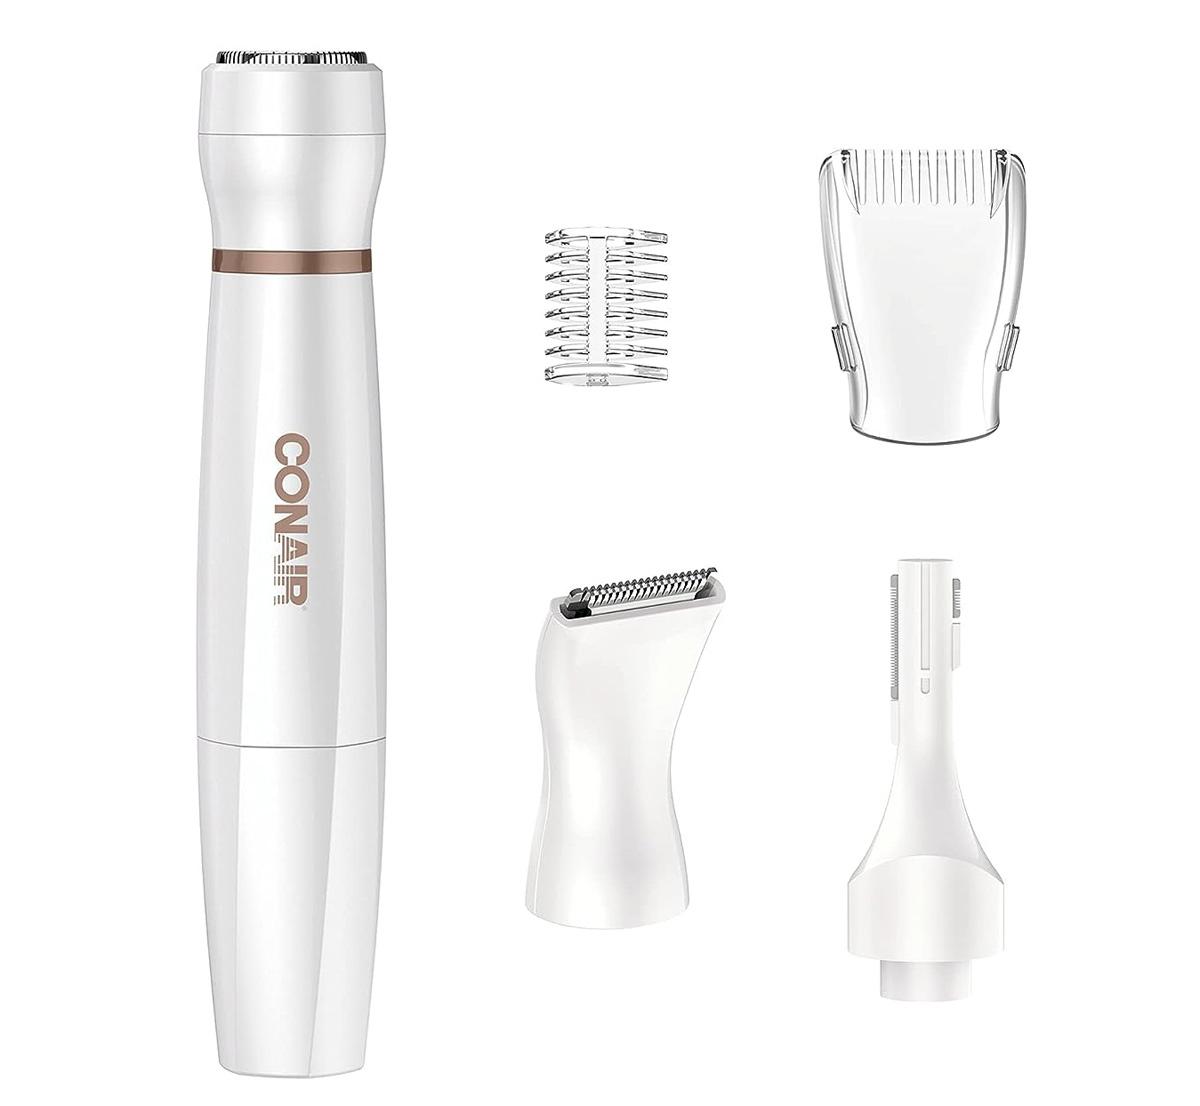 Conair All-In-One Cordless Electric Facial Trimmer Set for $6.29